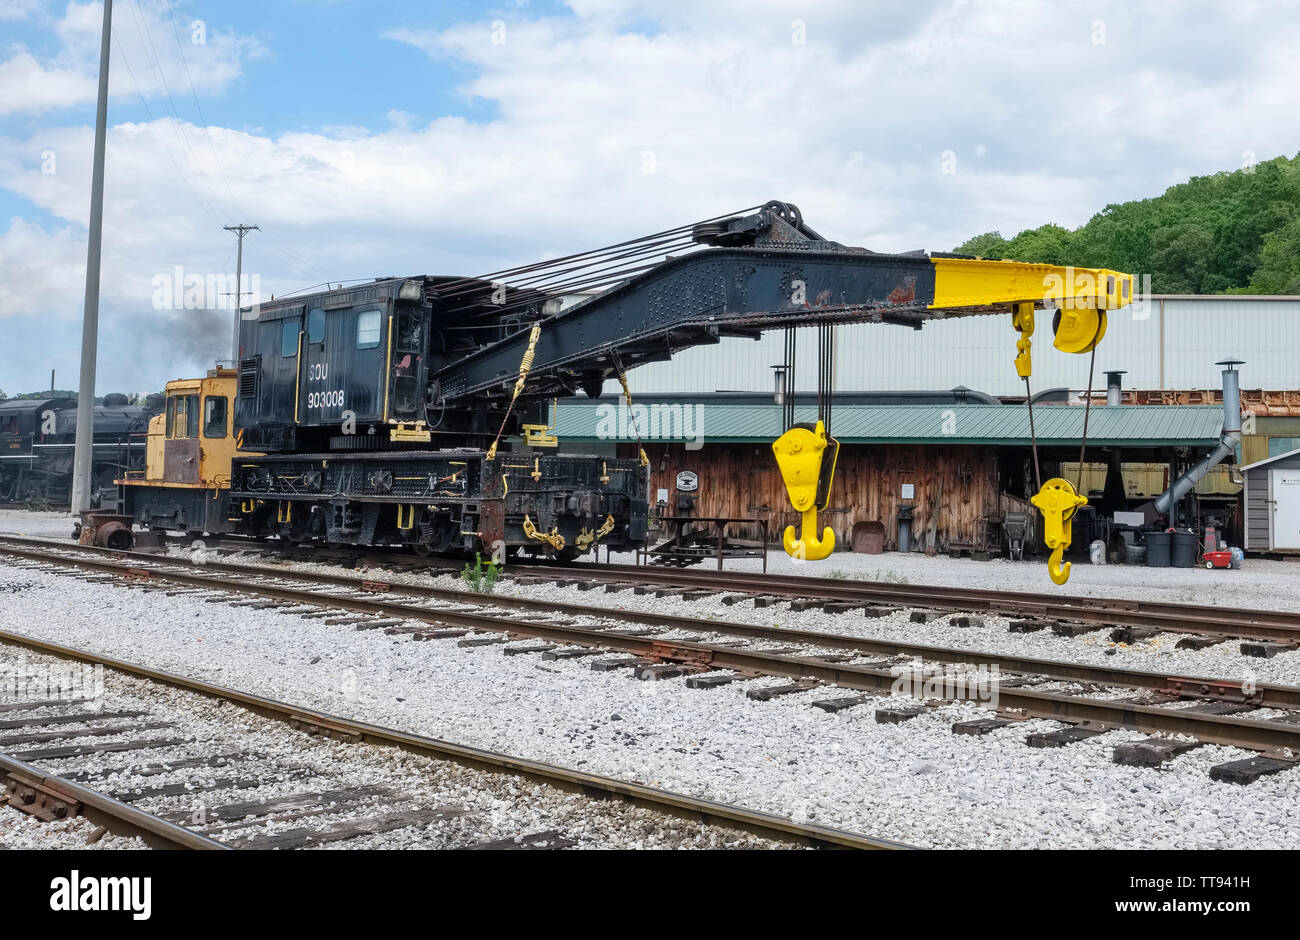 Restored railroad crane derrick car used for heavy lifting on and around railroads. Stock Photo